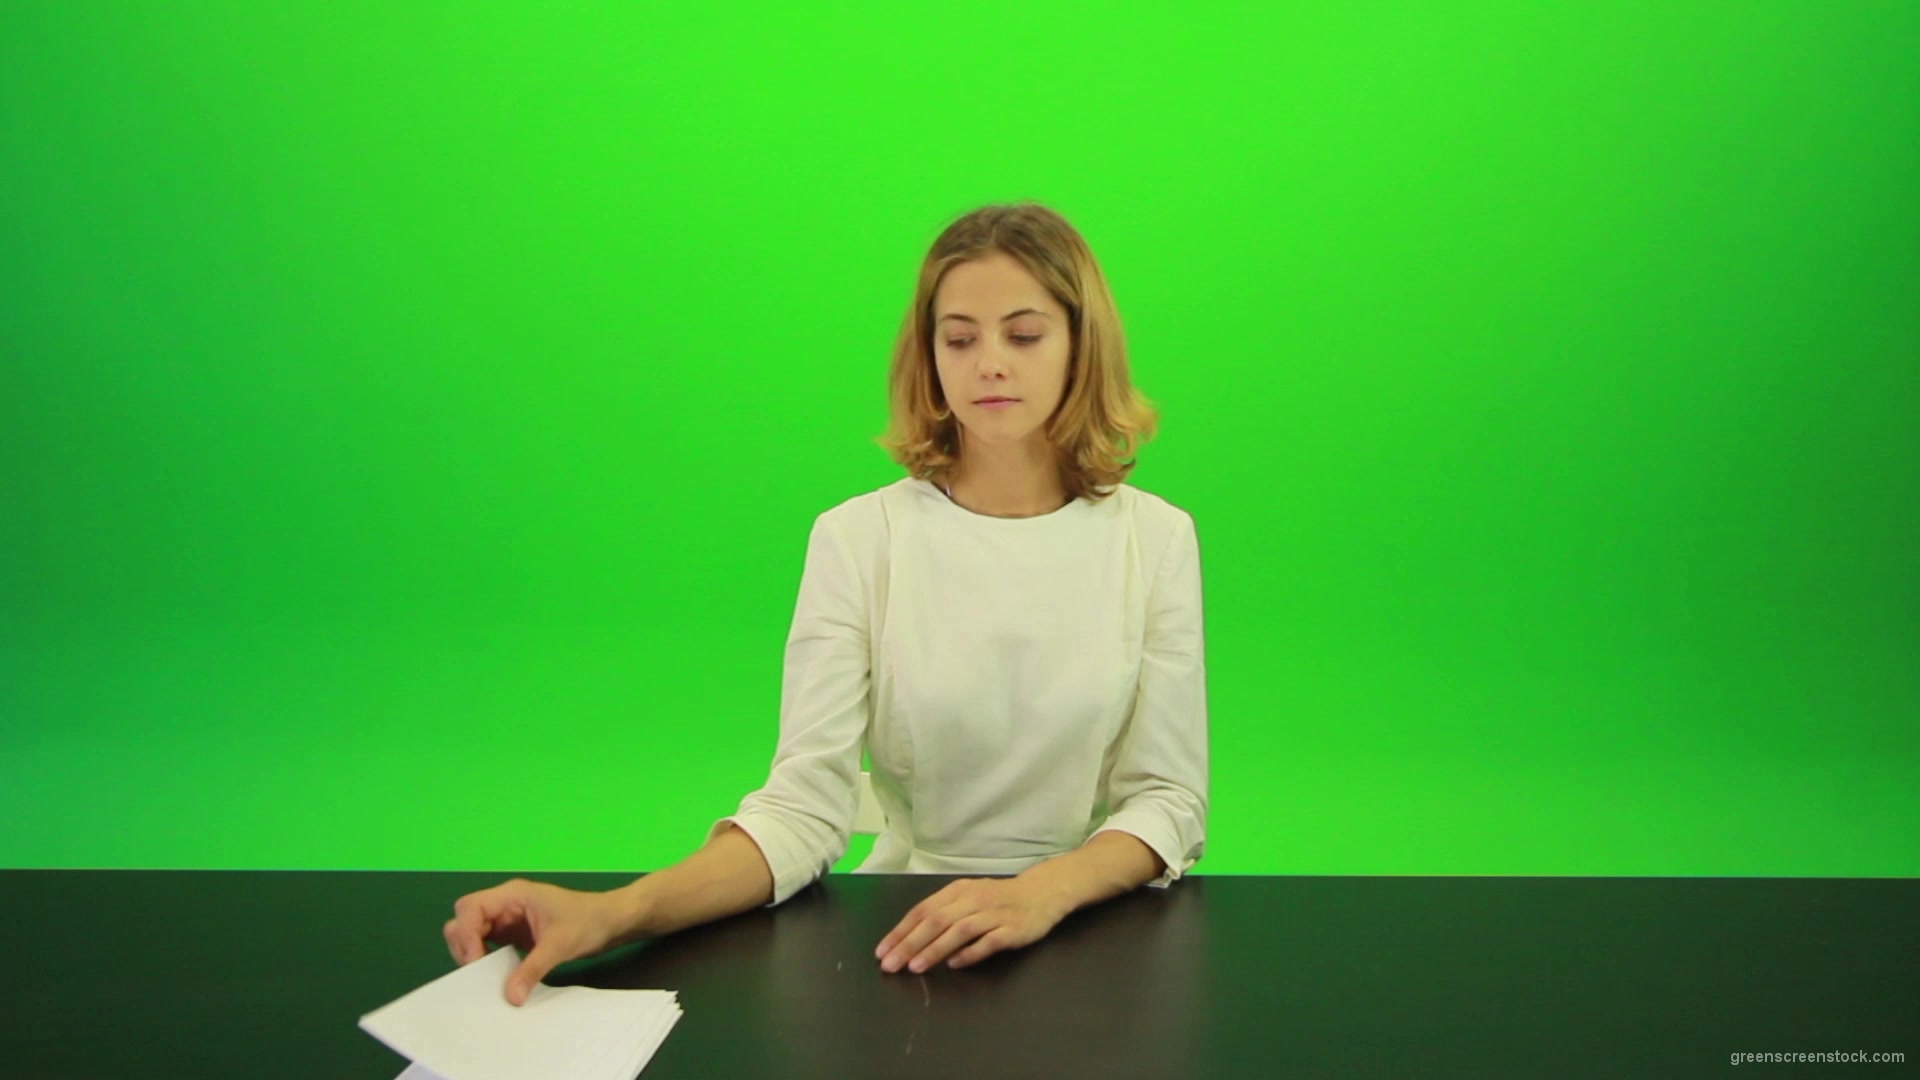 Blonde-hair-girl-in-white-shirt-give-3-point-mark-score-Full-HD-Green-Screen-Video-Footage_002 Green Screen Stock